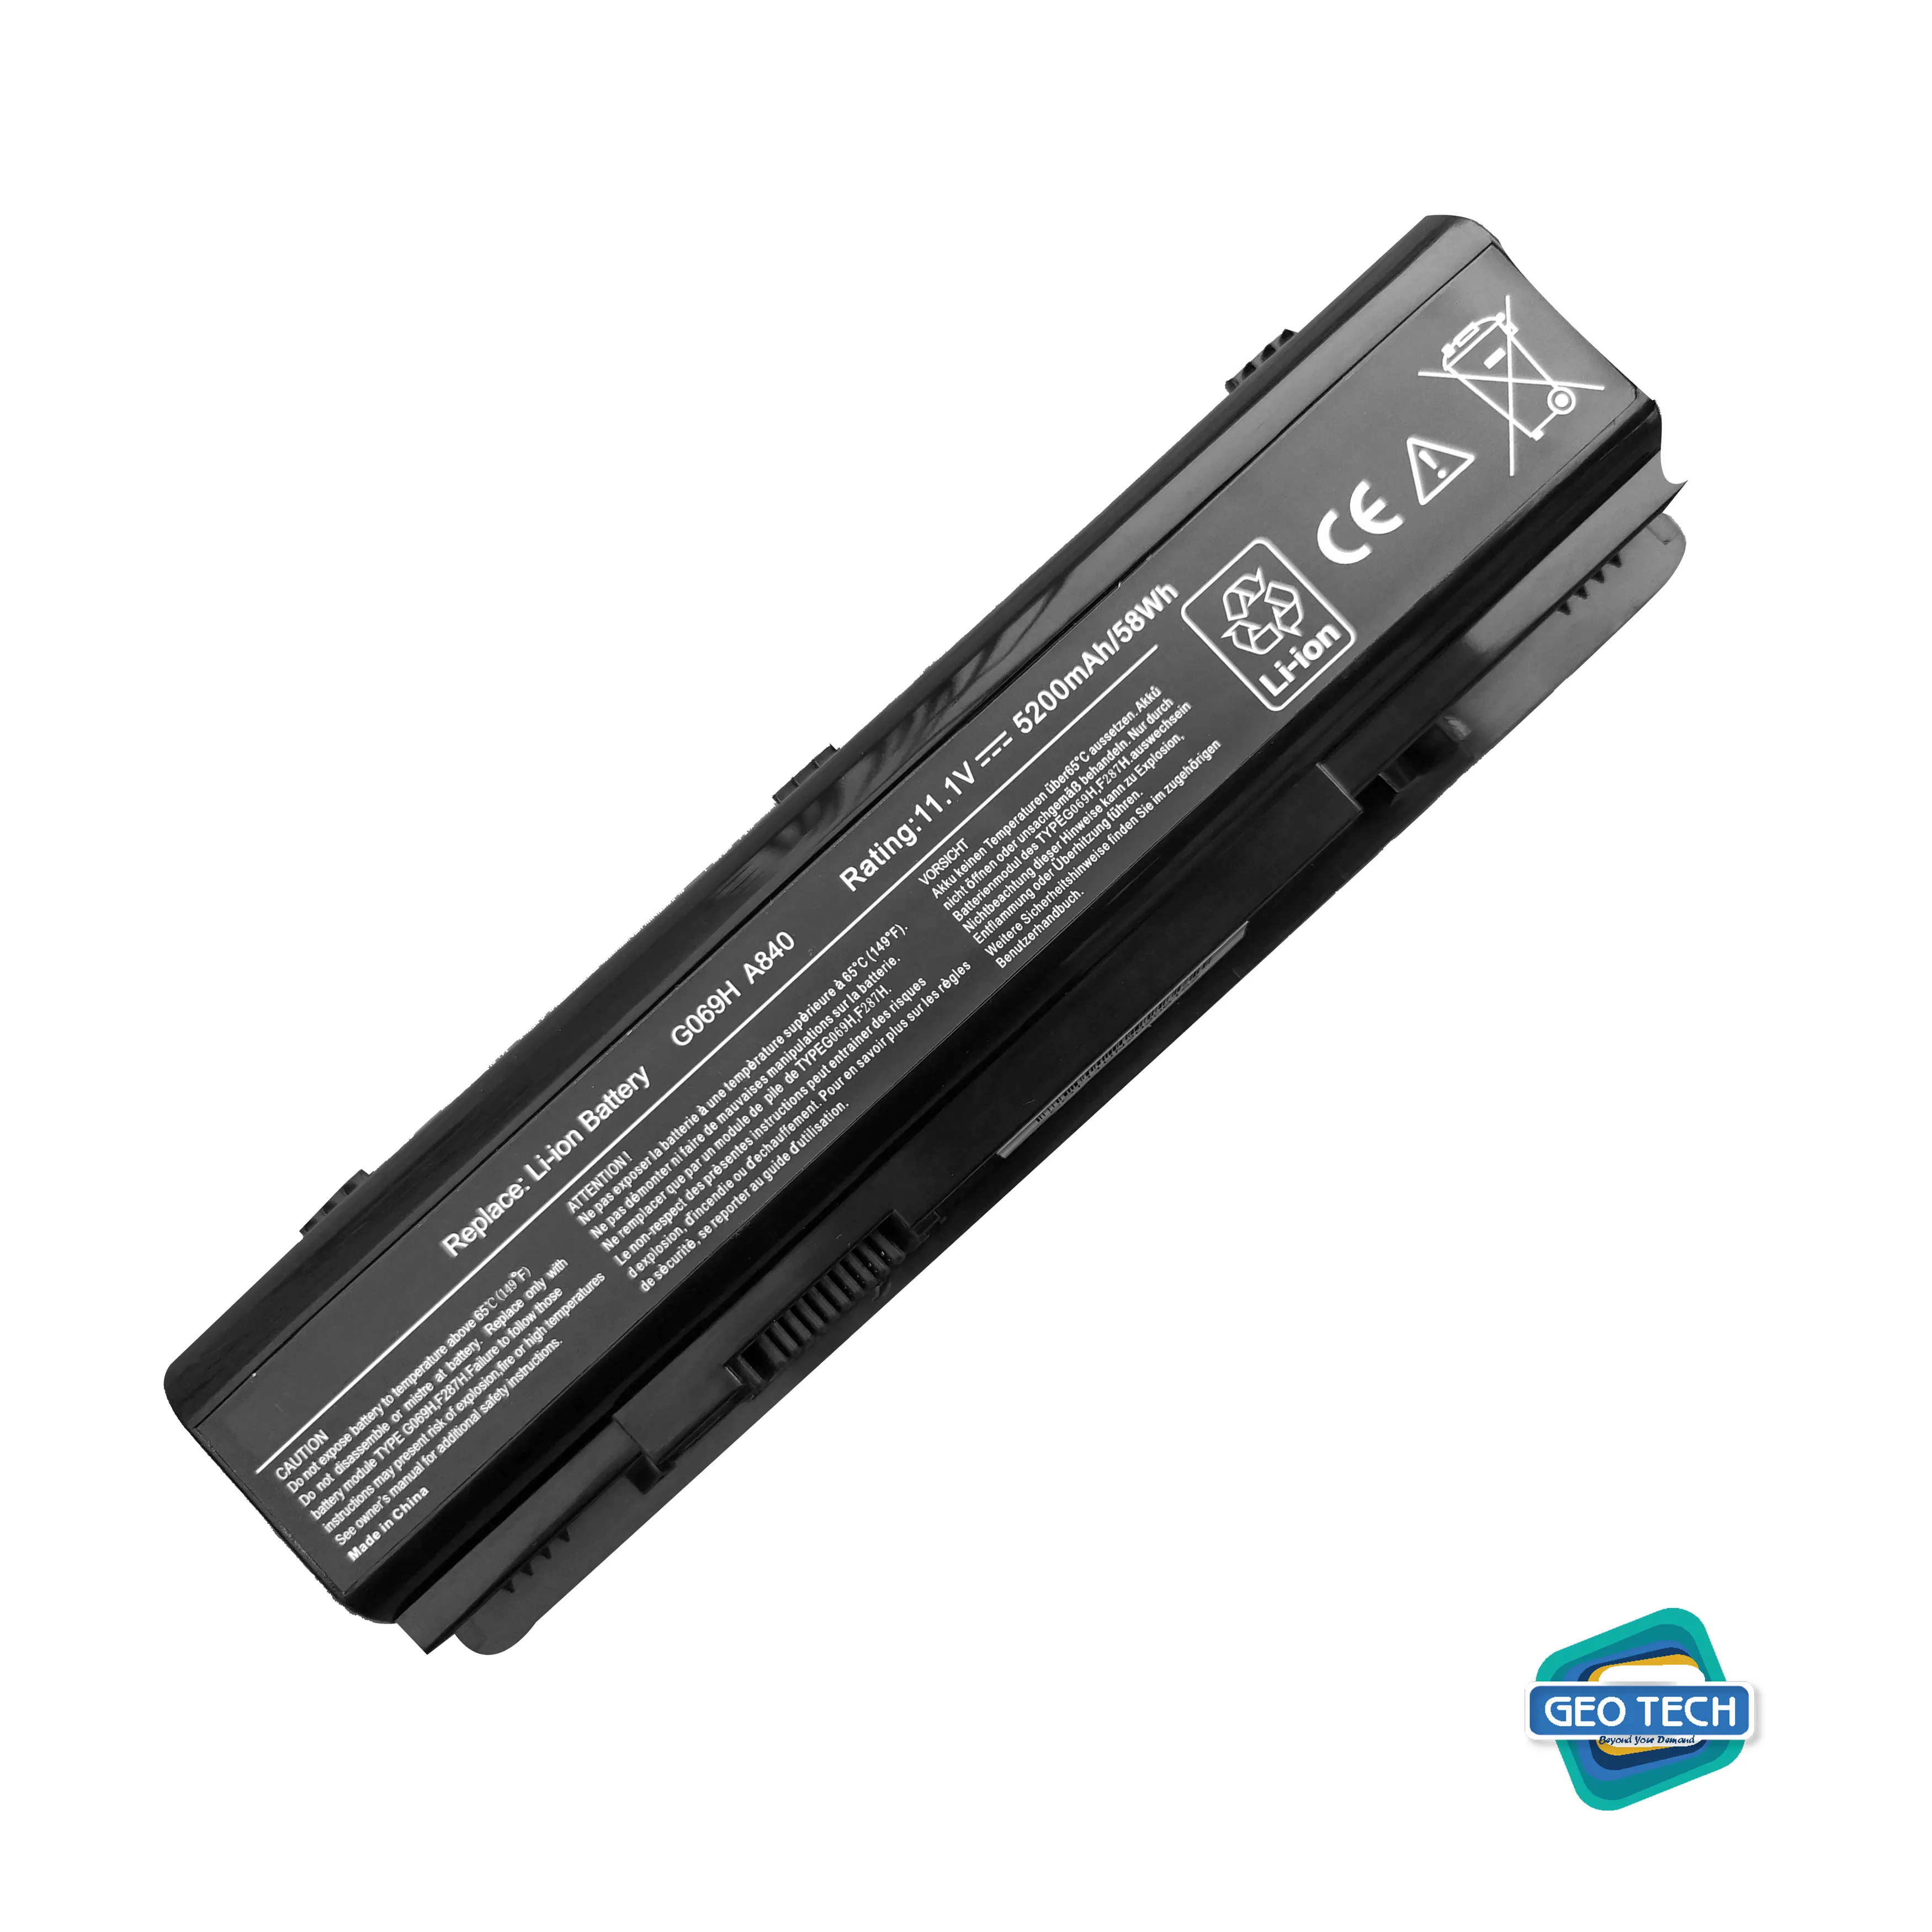 Dell Vostro A840 A860 6Cell Battery F286H/F287H/ DELL Vostro A840 A860 1014 1014N 1015 1015N 1088 1088N BATTERY